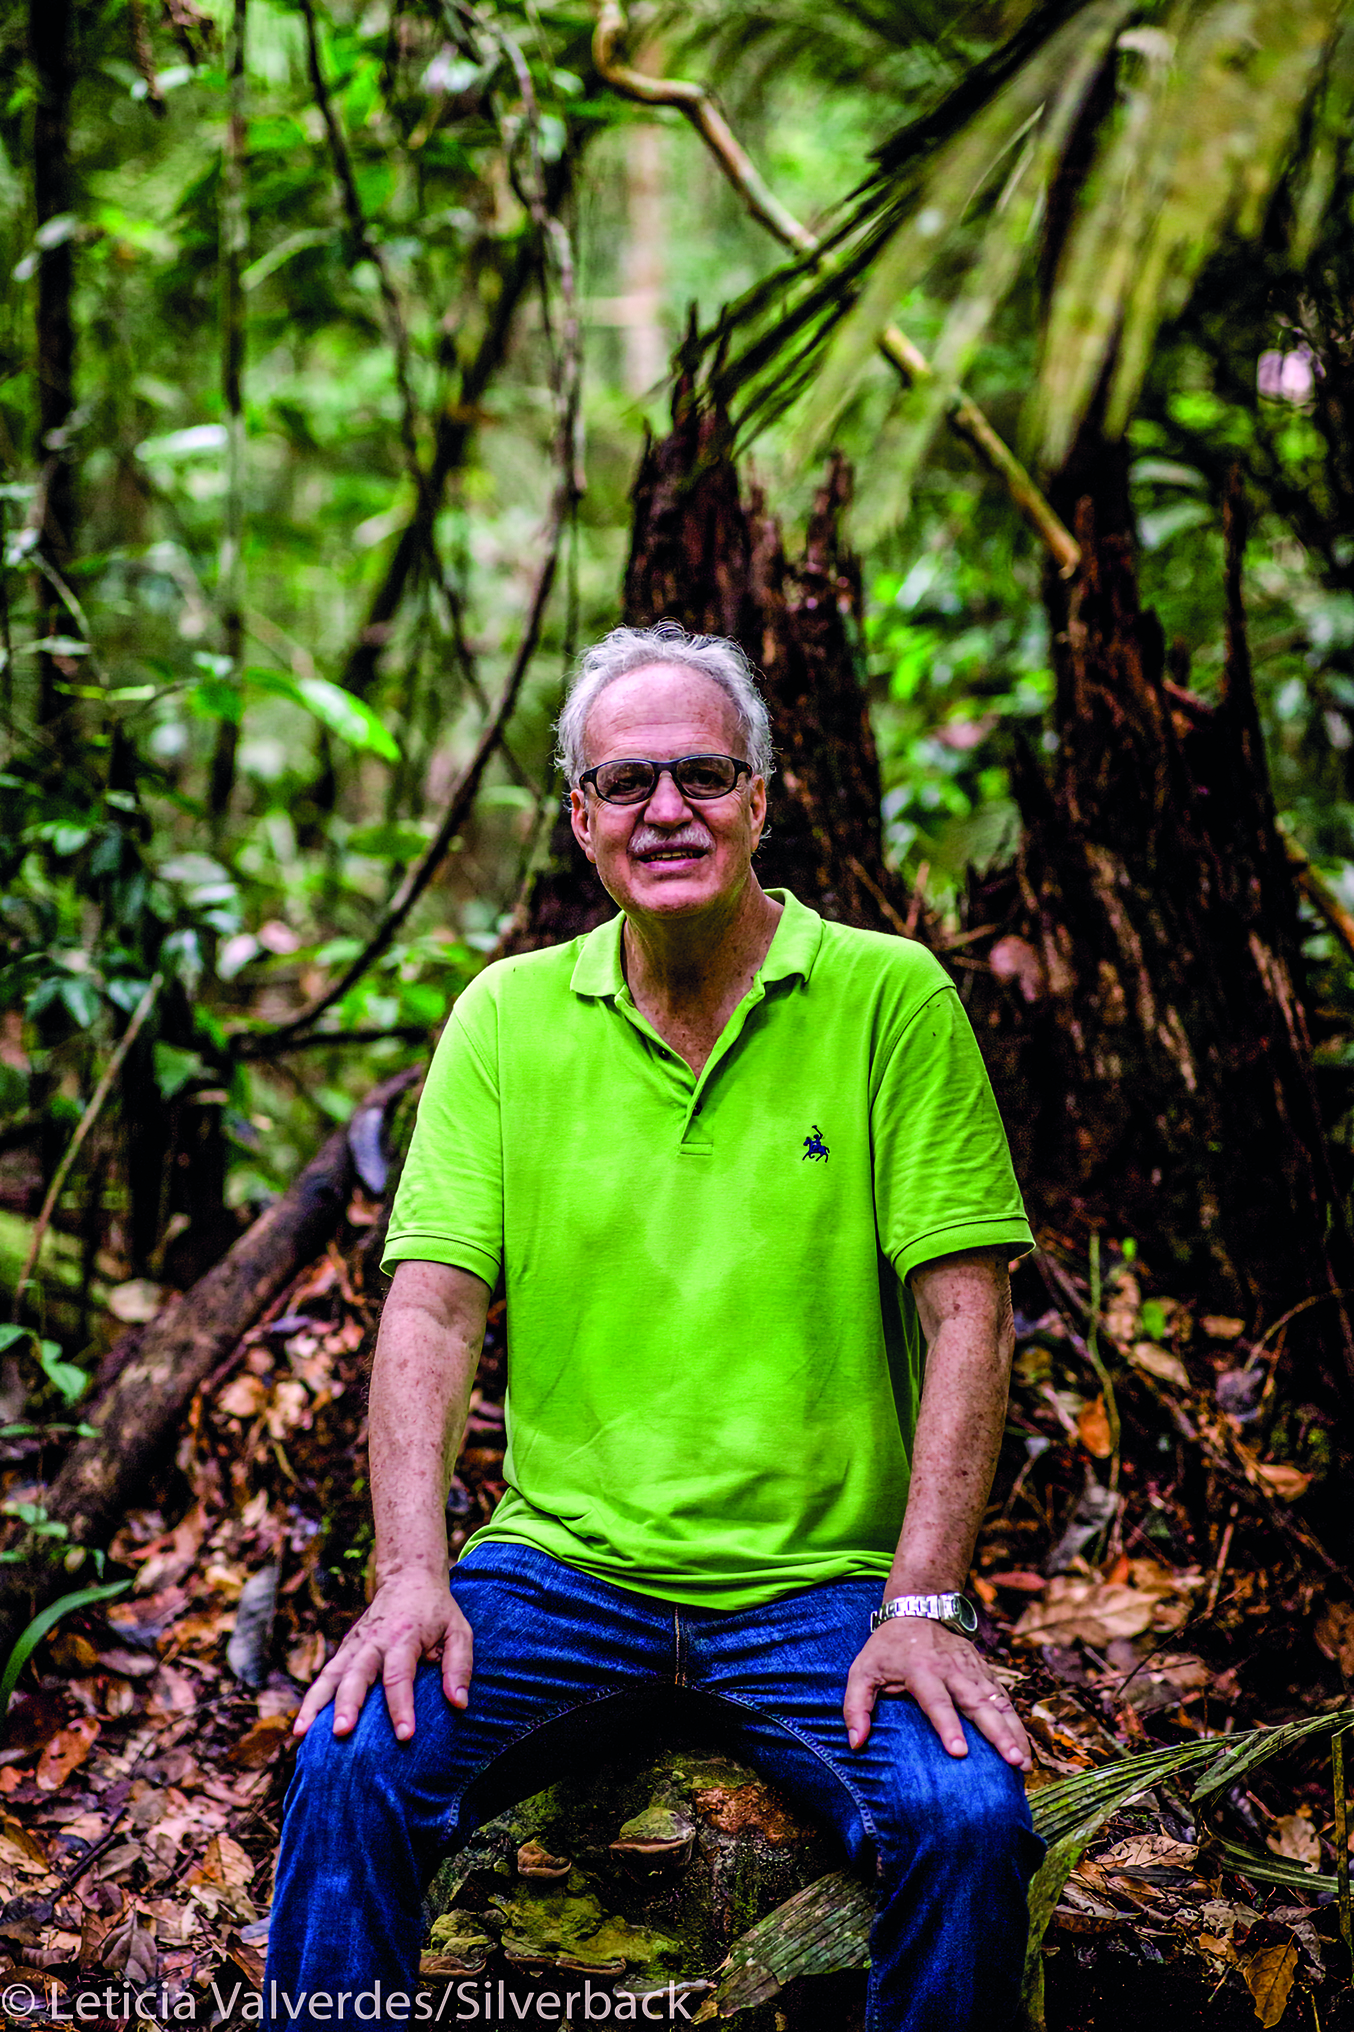 Leticia Valverdes/Silverback – Carlos is revolutionizing the model for development in the Amazon through pioneer research and community organizing. He is creating a new economy that will benefit humans and the environment alike. 